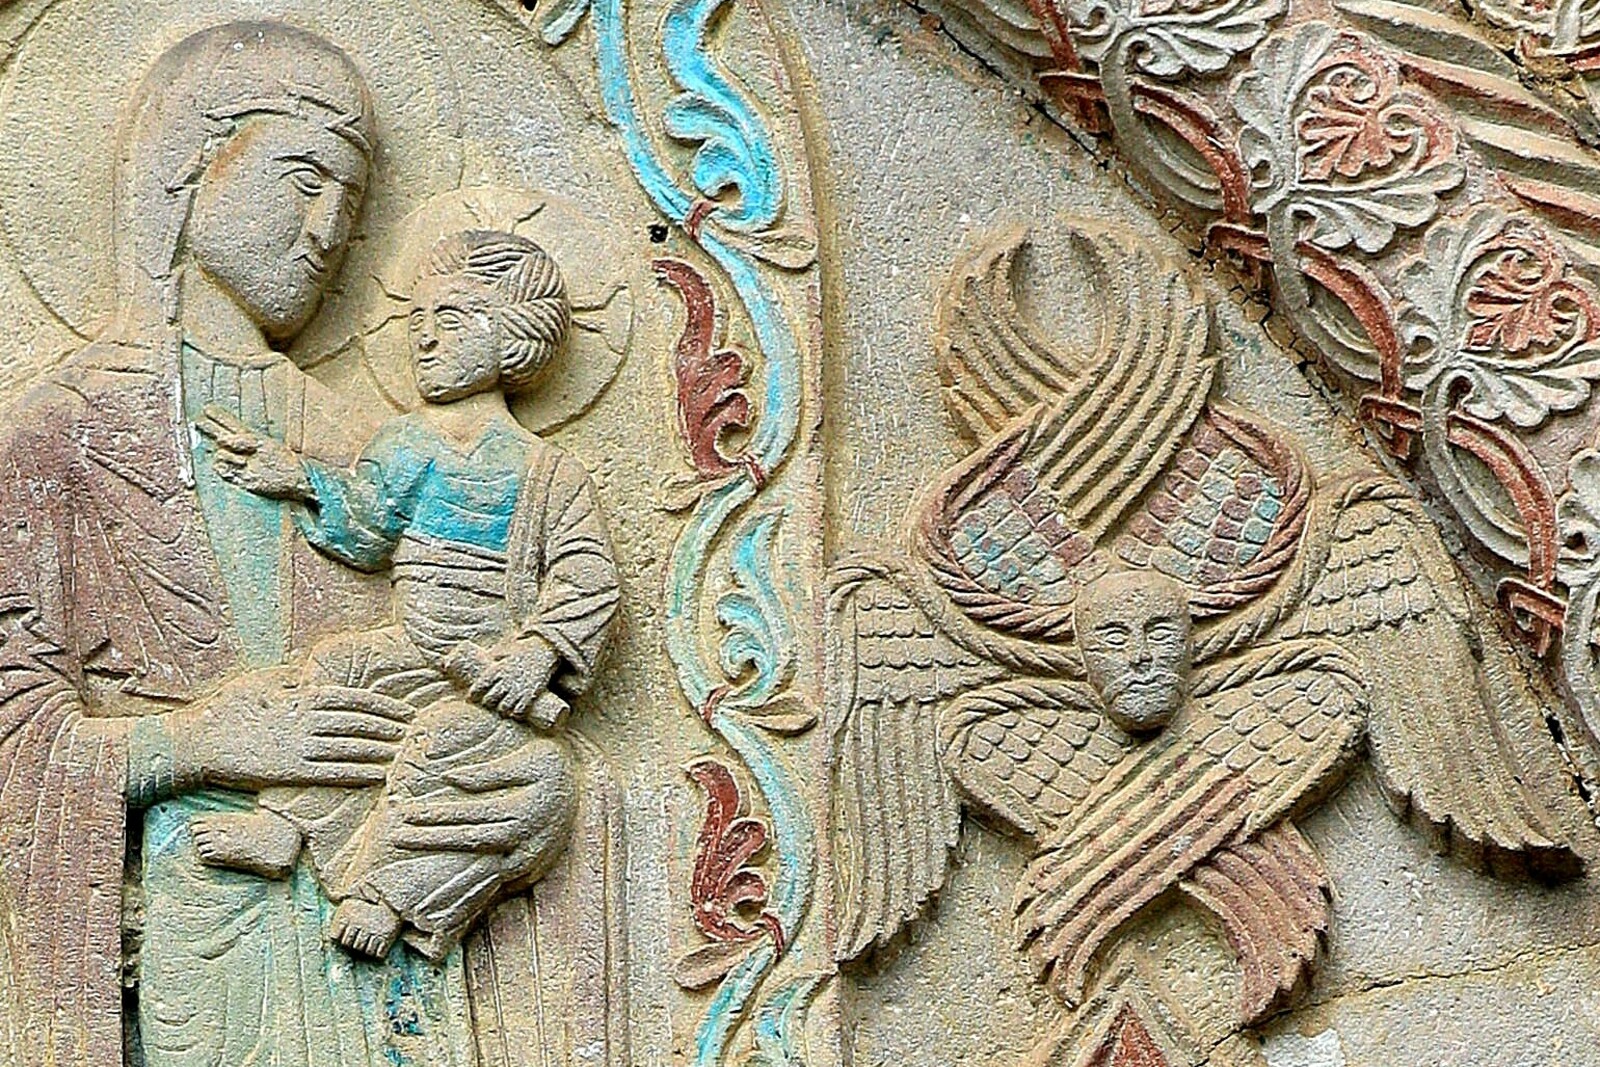 Bifora on the South Wall of the Narthex, detail